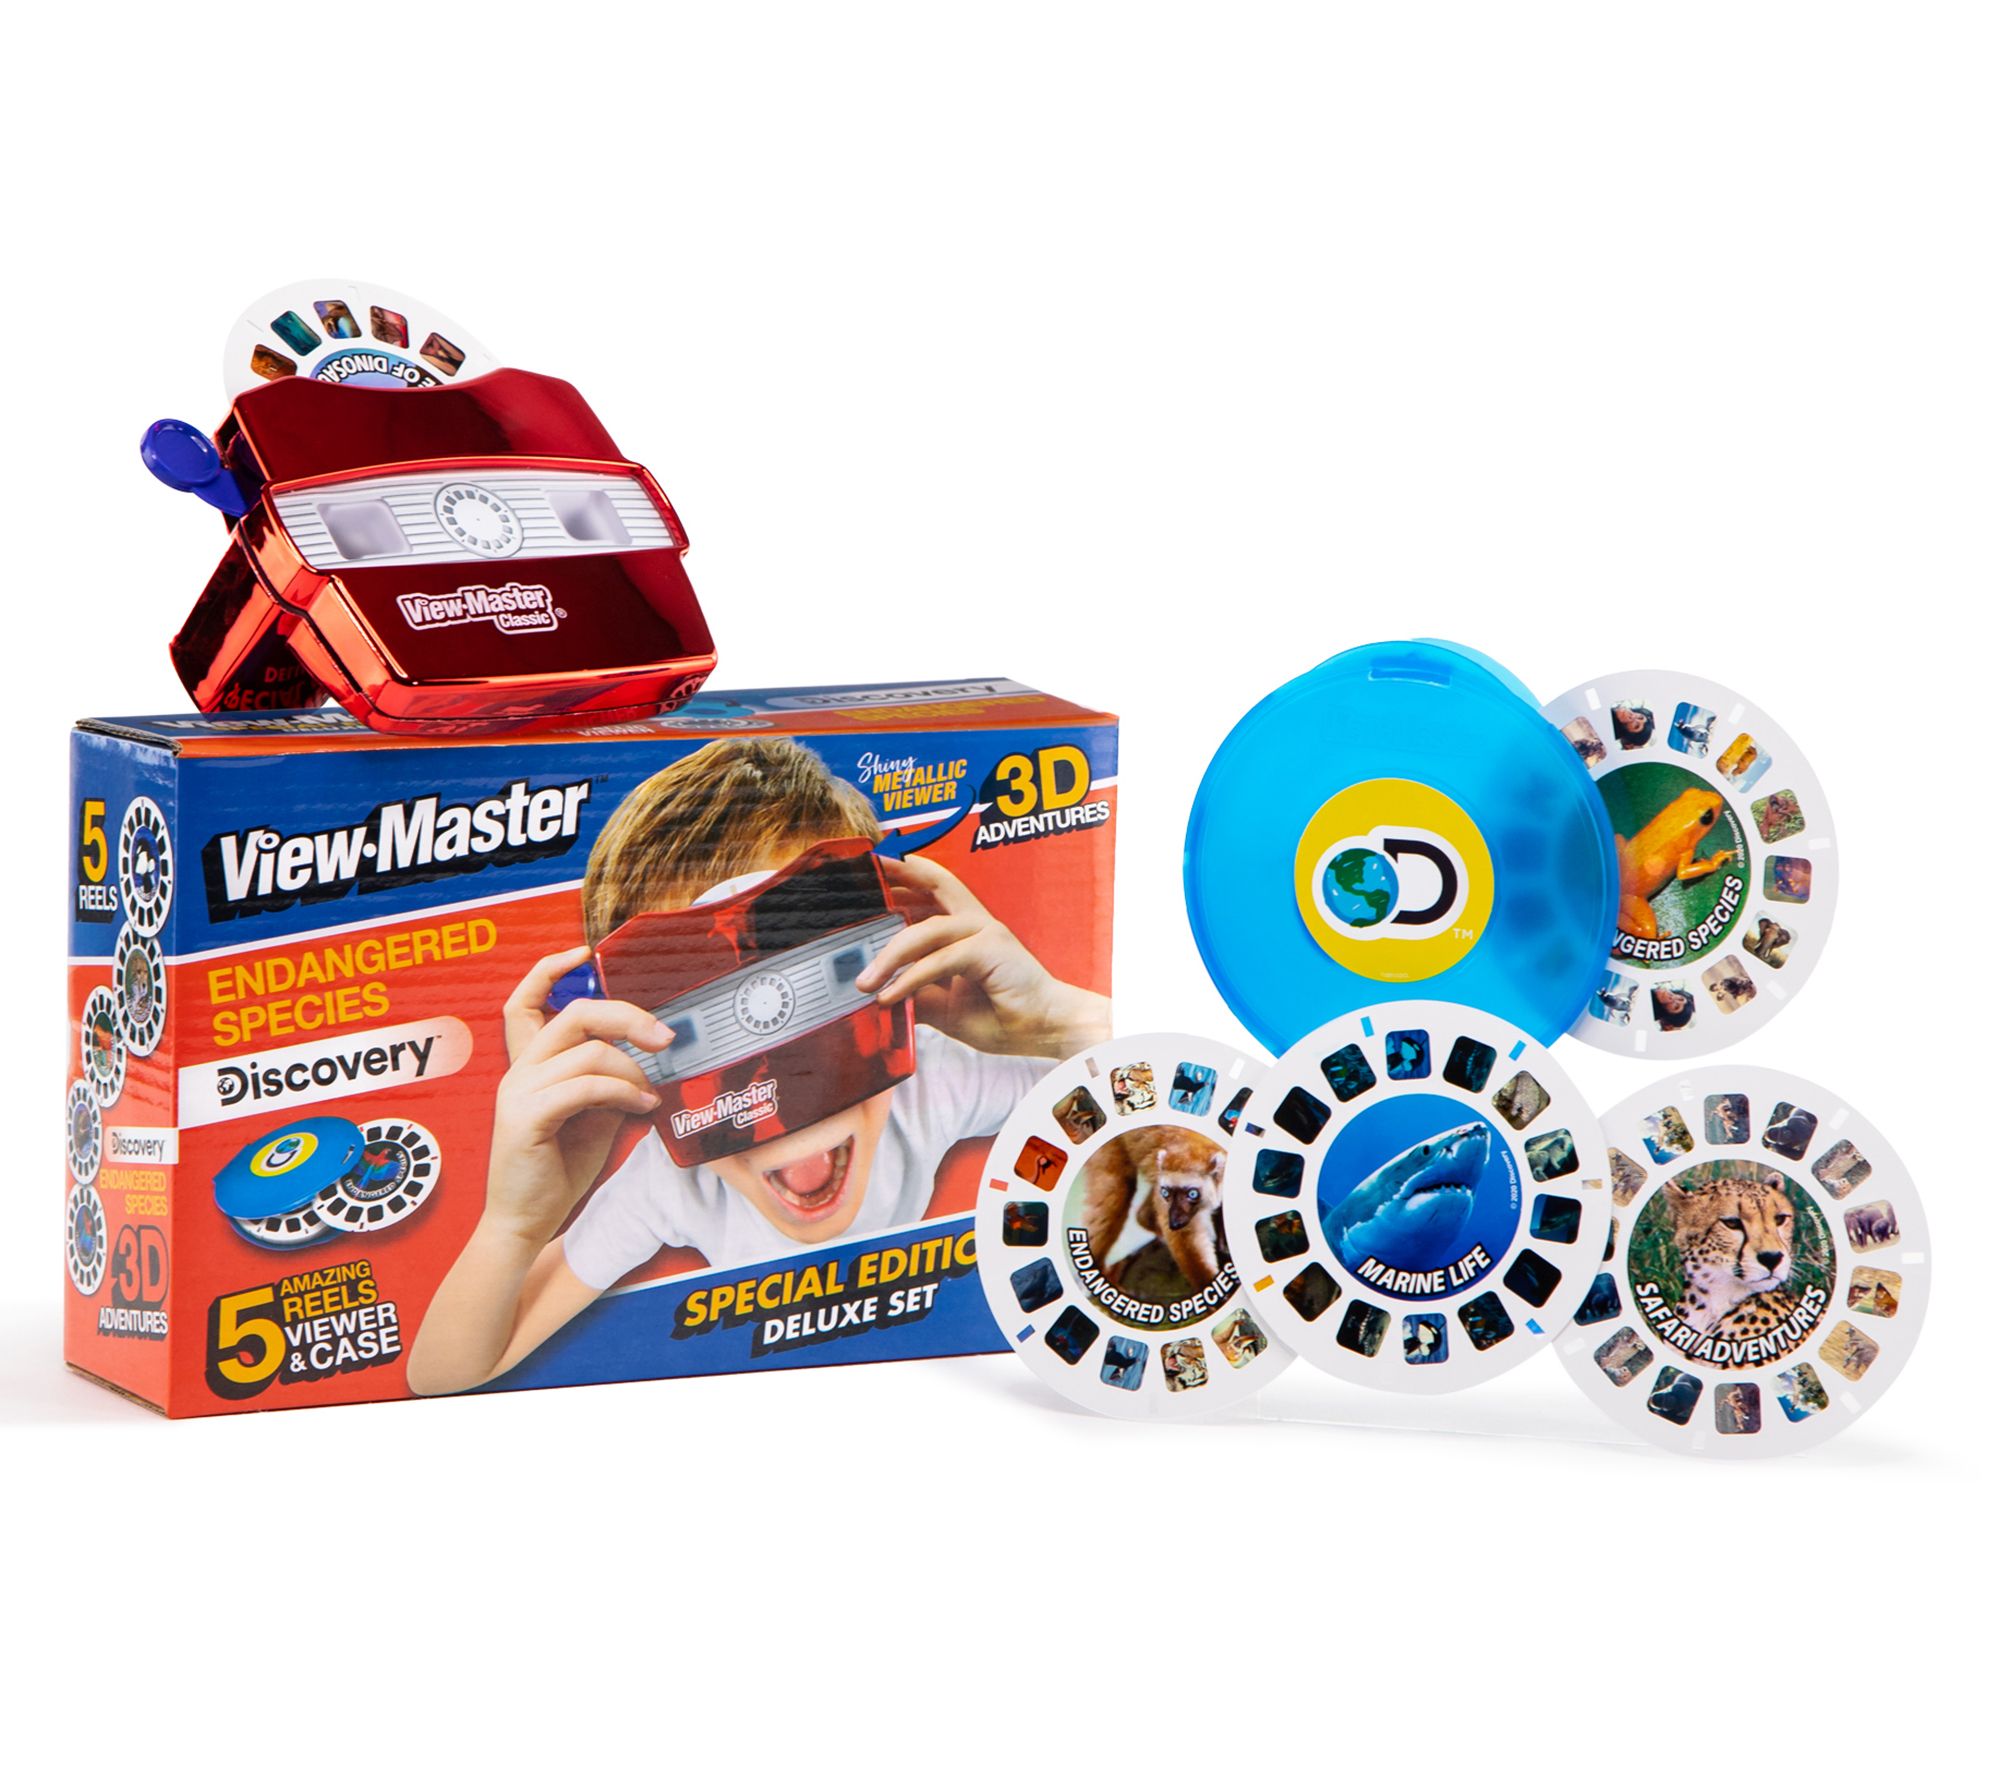 View Master Classic Viewer with Reels Discovery: Endangered Species